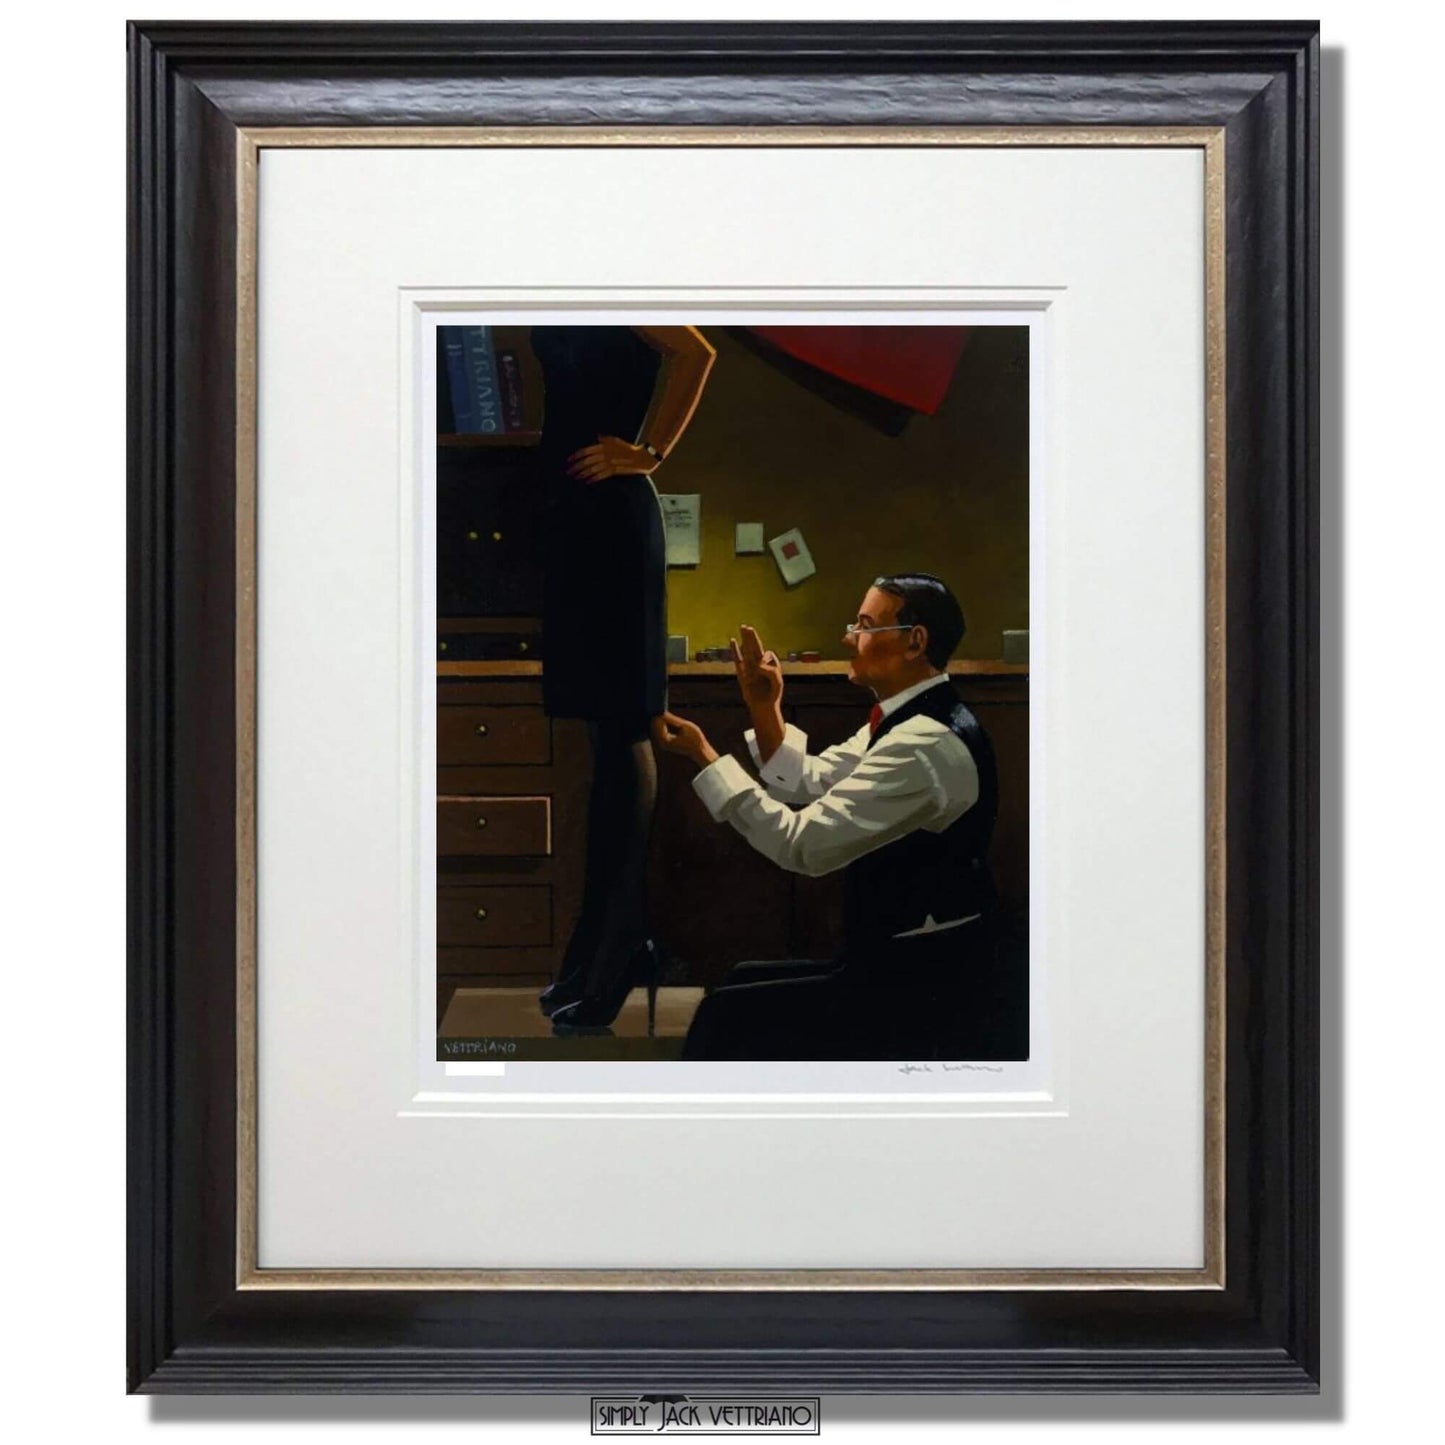 The Devoted Dressmaker by Jack Vettriano Limited Edition Framed